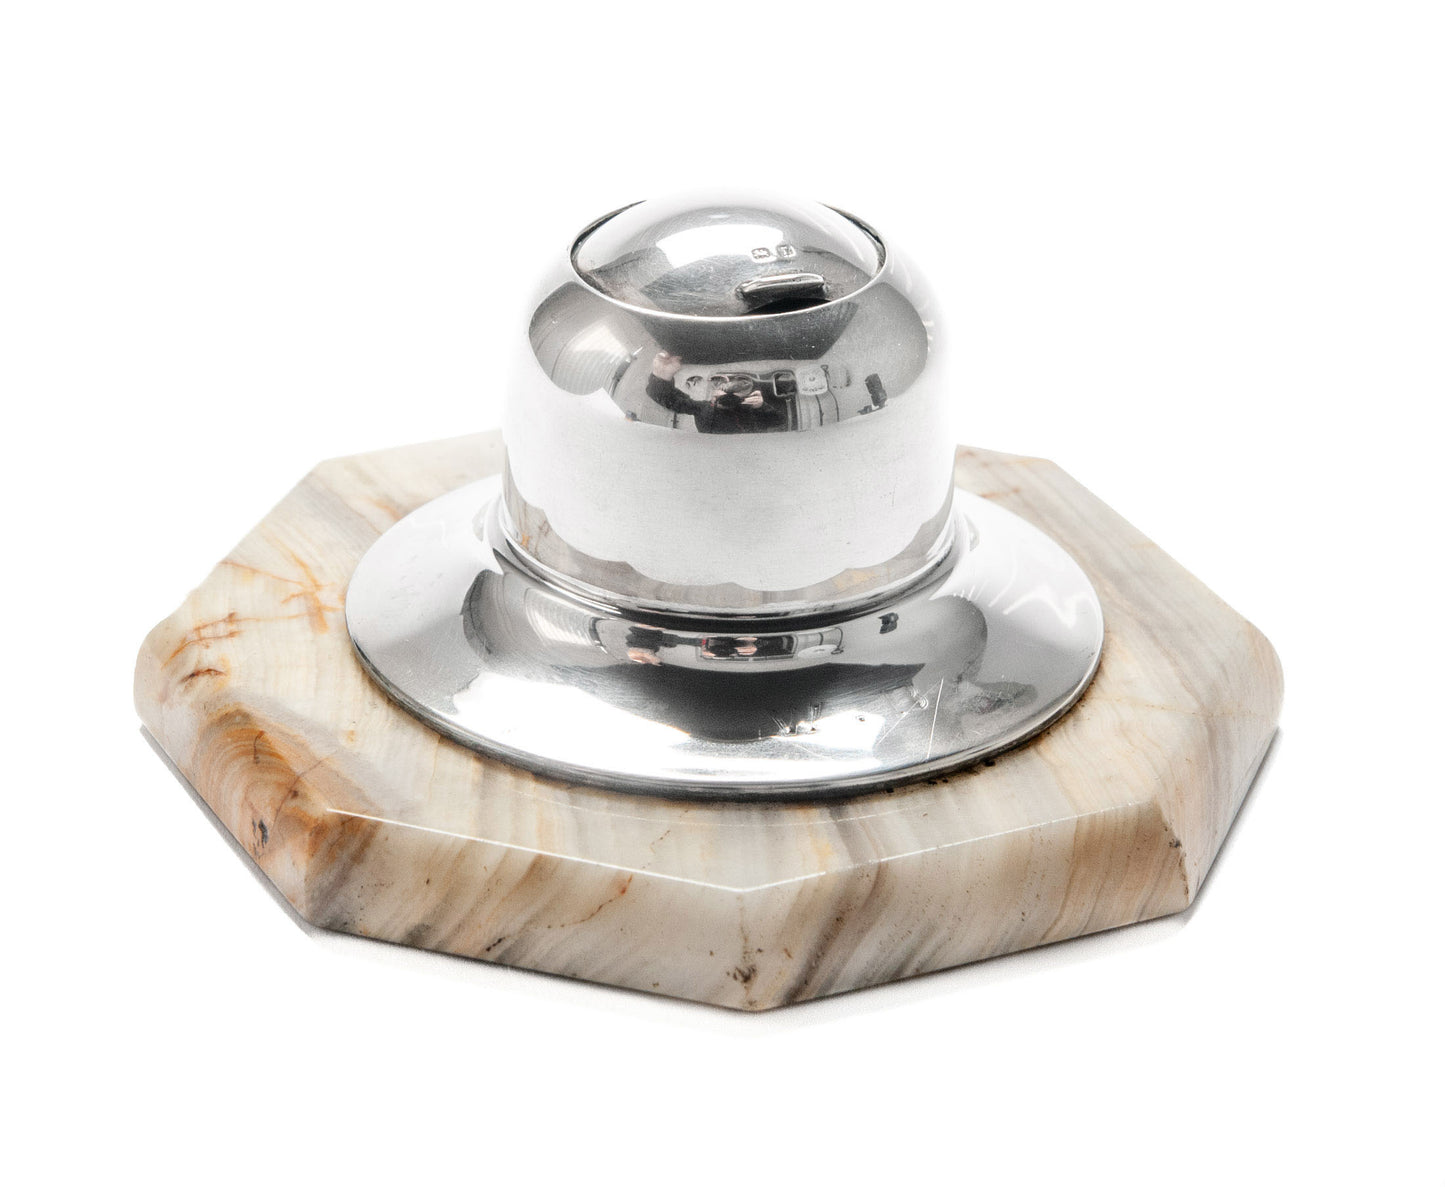 Antique Mappin & Webb Solid Silver & Turkish Willow Onyx Inkwell, London 1912 (Code 2070)